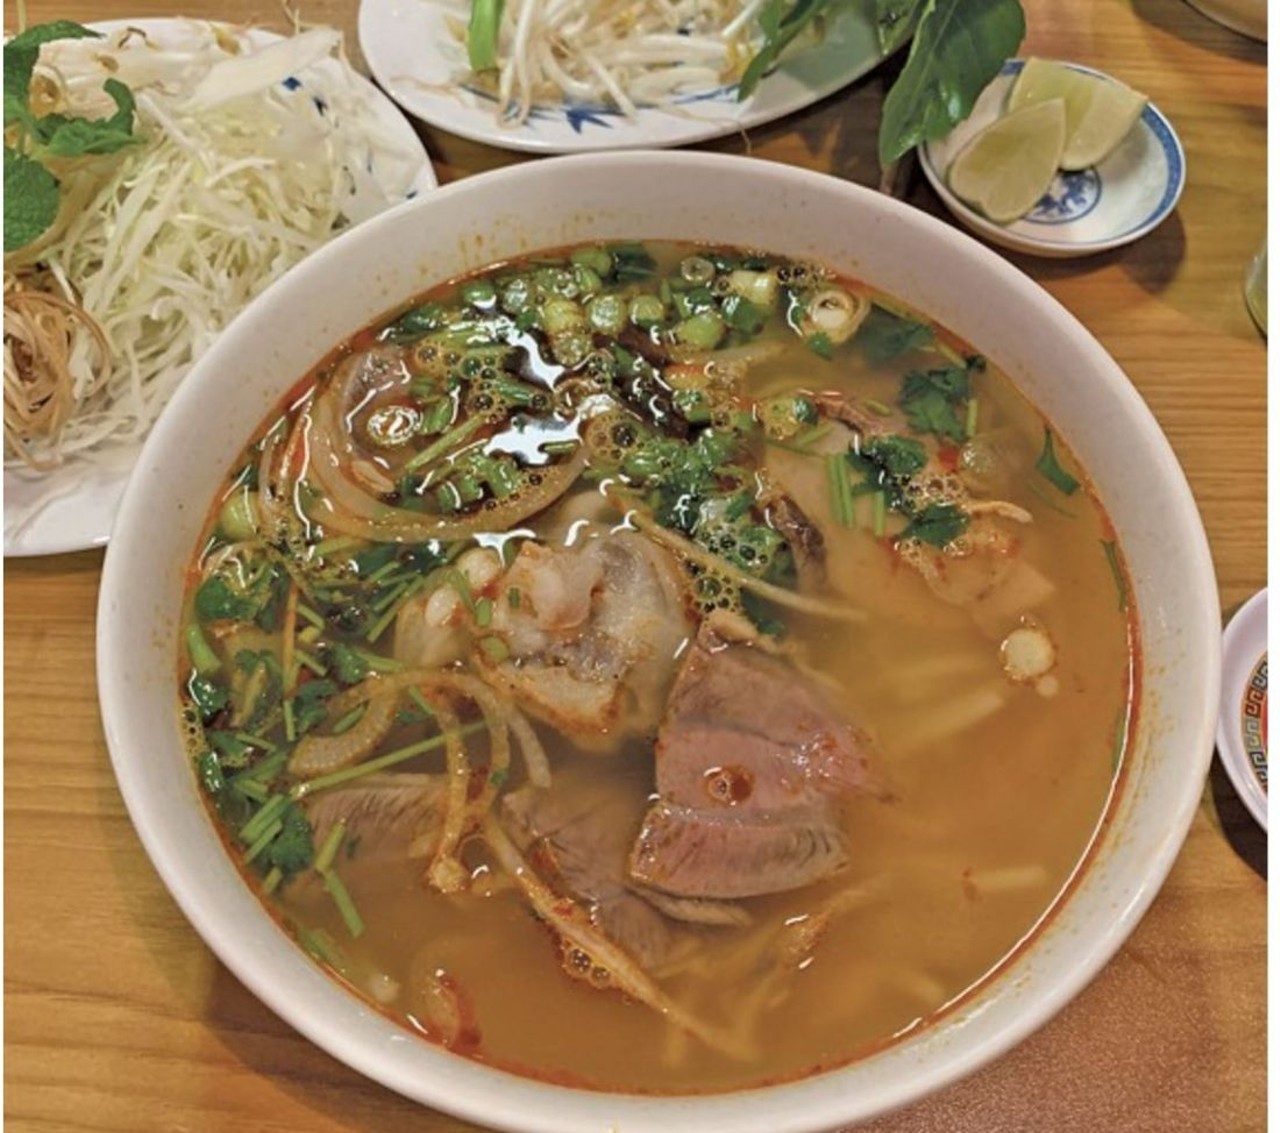 Pho Lee
3710 Payne Ave. #10, Cleveland 
There can never be too many pho spots. It's always pho season, but colder weather screams for bun bo hue, a meatier, spicier and, we&#146;d argue, more winter-appropriate brew. The version served here starts with deeply flavorful beef stock and is kicked up in all sorts of ways, evident by the burnt amber hue and pools of red chili oil that slick the surface. Unlike with pho, there's only one version, a hat-size bowl with thin-sliced beef, pork roll, tendon, an unwieldy knuckle of some sort and thick, round noodles. It's paired with an exceptionally fresh garnish plate overflowing with snow-white bean sprouts, shredded cabbage, fried banana blossoms, fresh mint and limes.
Photo via Scene Archives